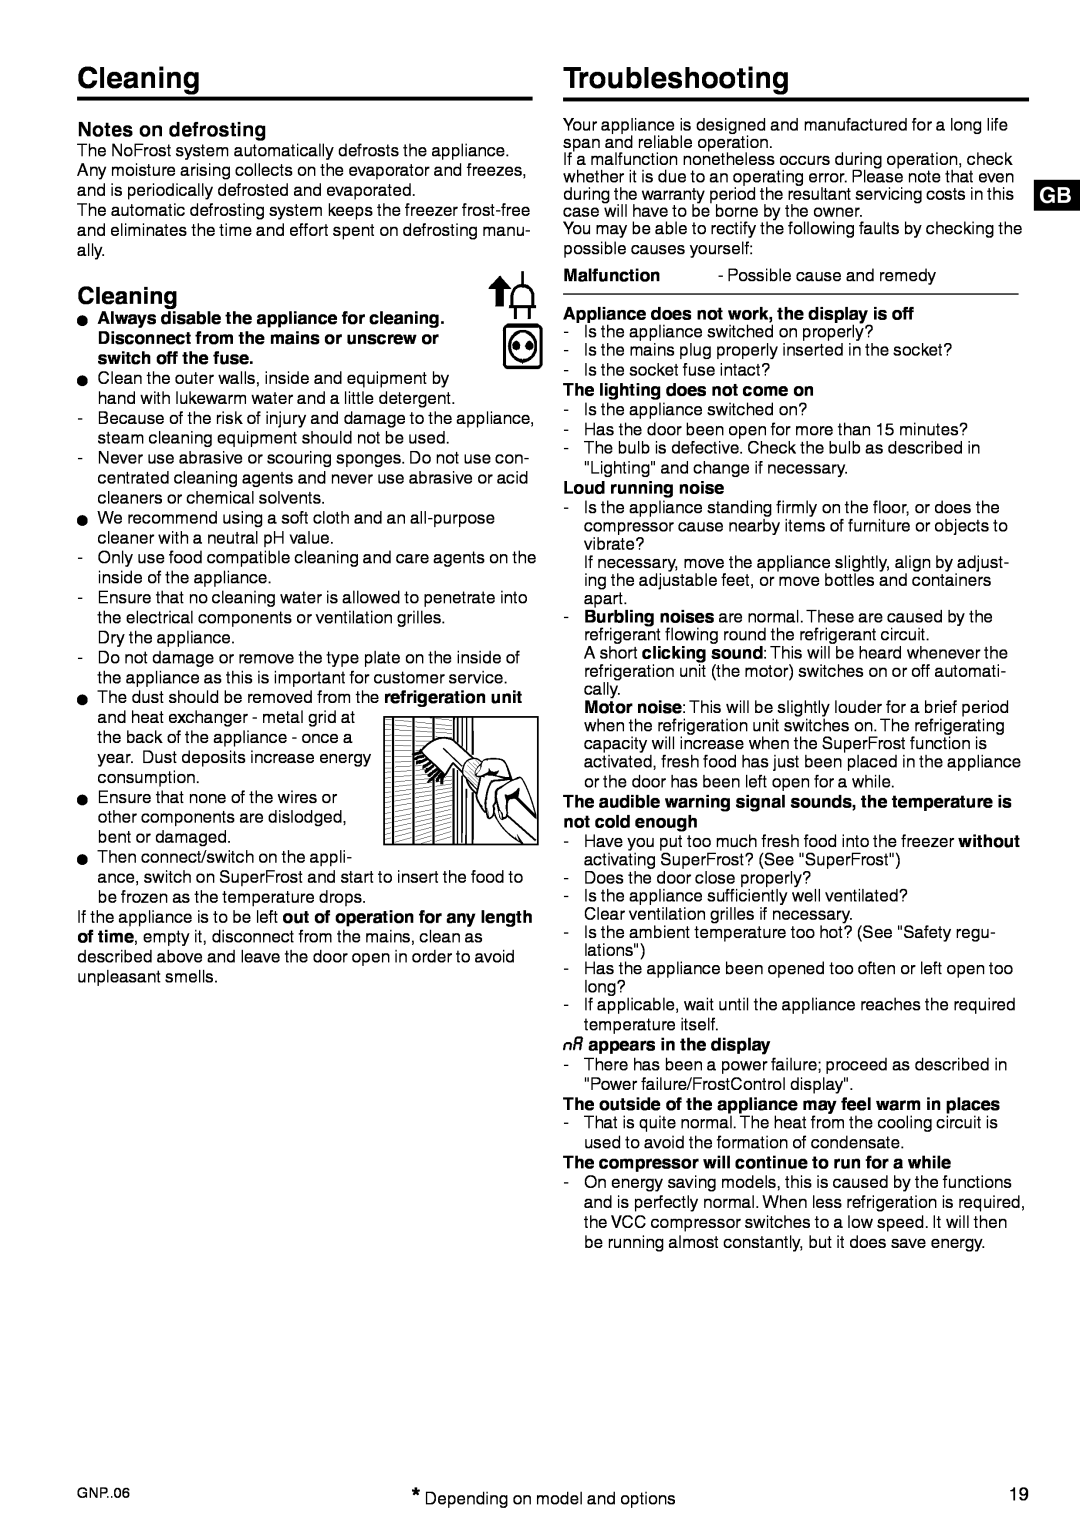 Liebherr 7084 152 - 00 manual Cleaning, Troubleshooting, Notes on defrosting, W Always disable the appliance for cleaning 